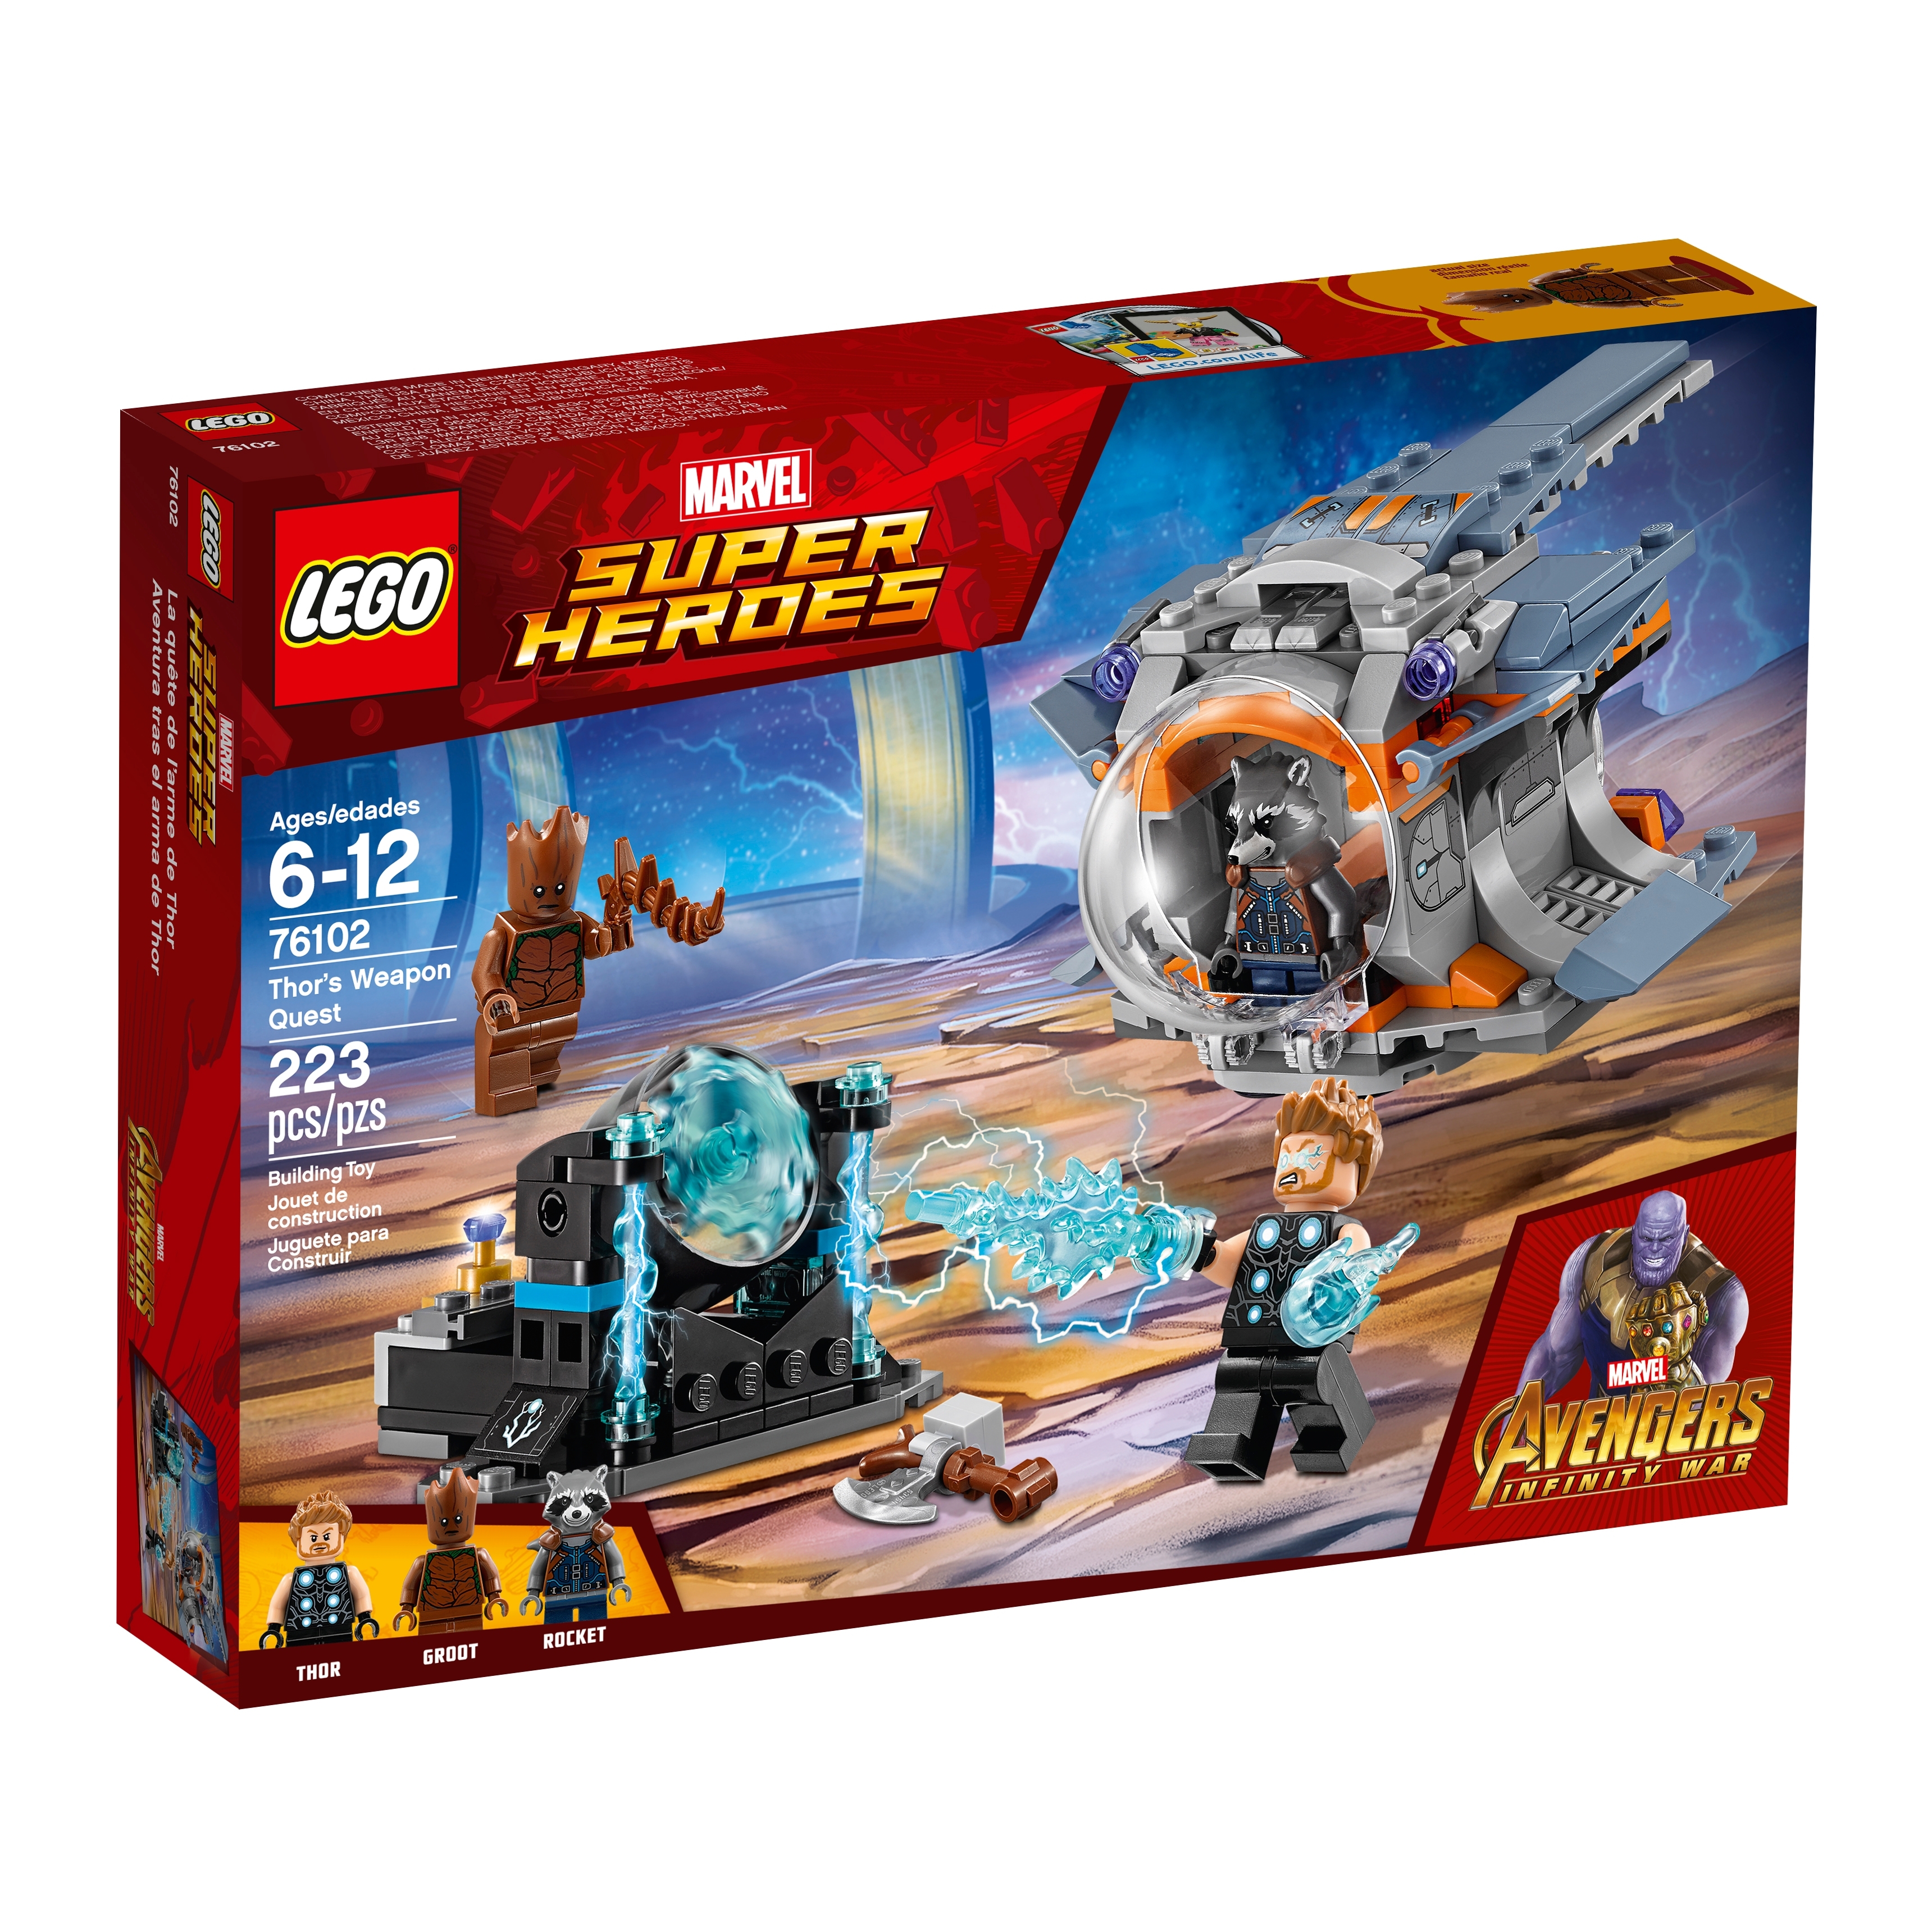 Lego Marvel Super Heroes 76102 Thor's Weapon Quest 223pcs Sealed 2018 Avengers 